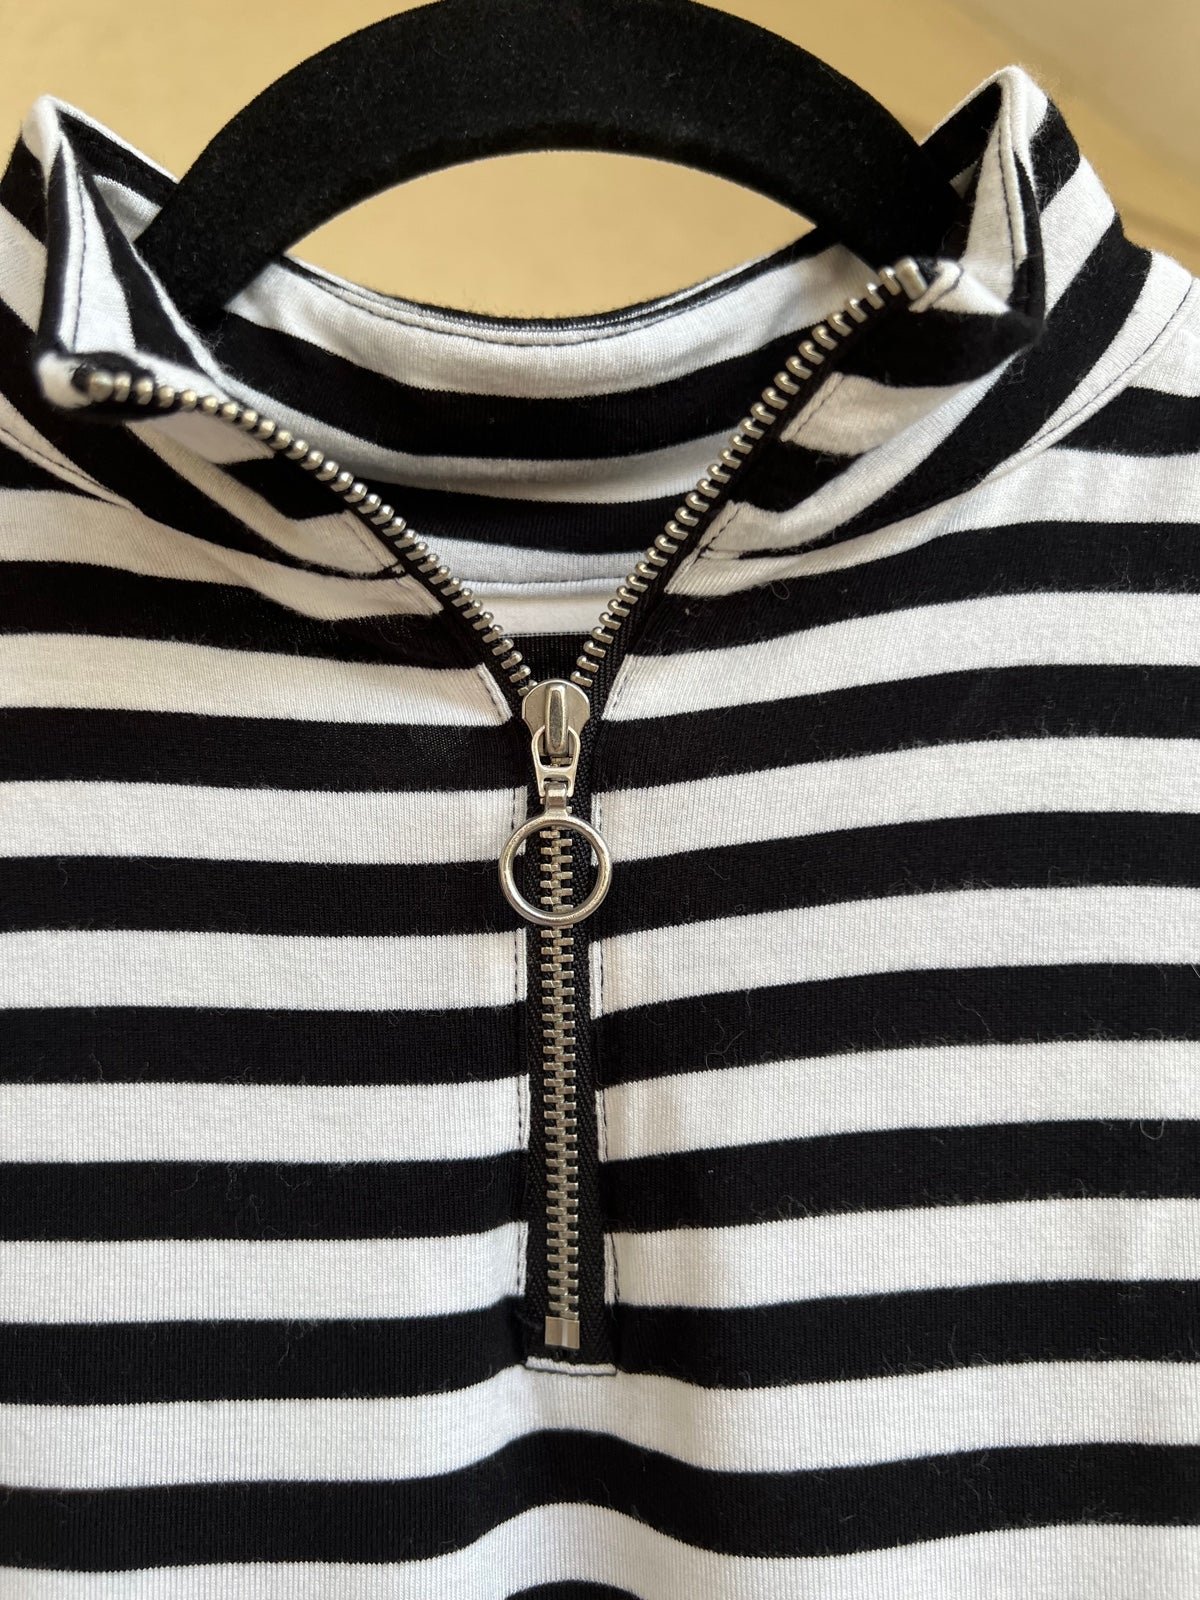 cheapest place to buy  White House Black Market Black and White Striped Mock Neck Tank XS gHVgUcboT Wholesale